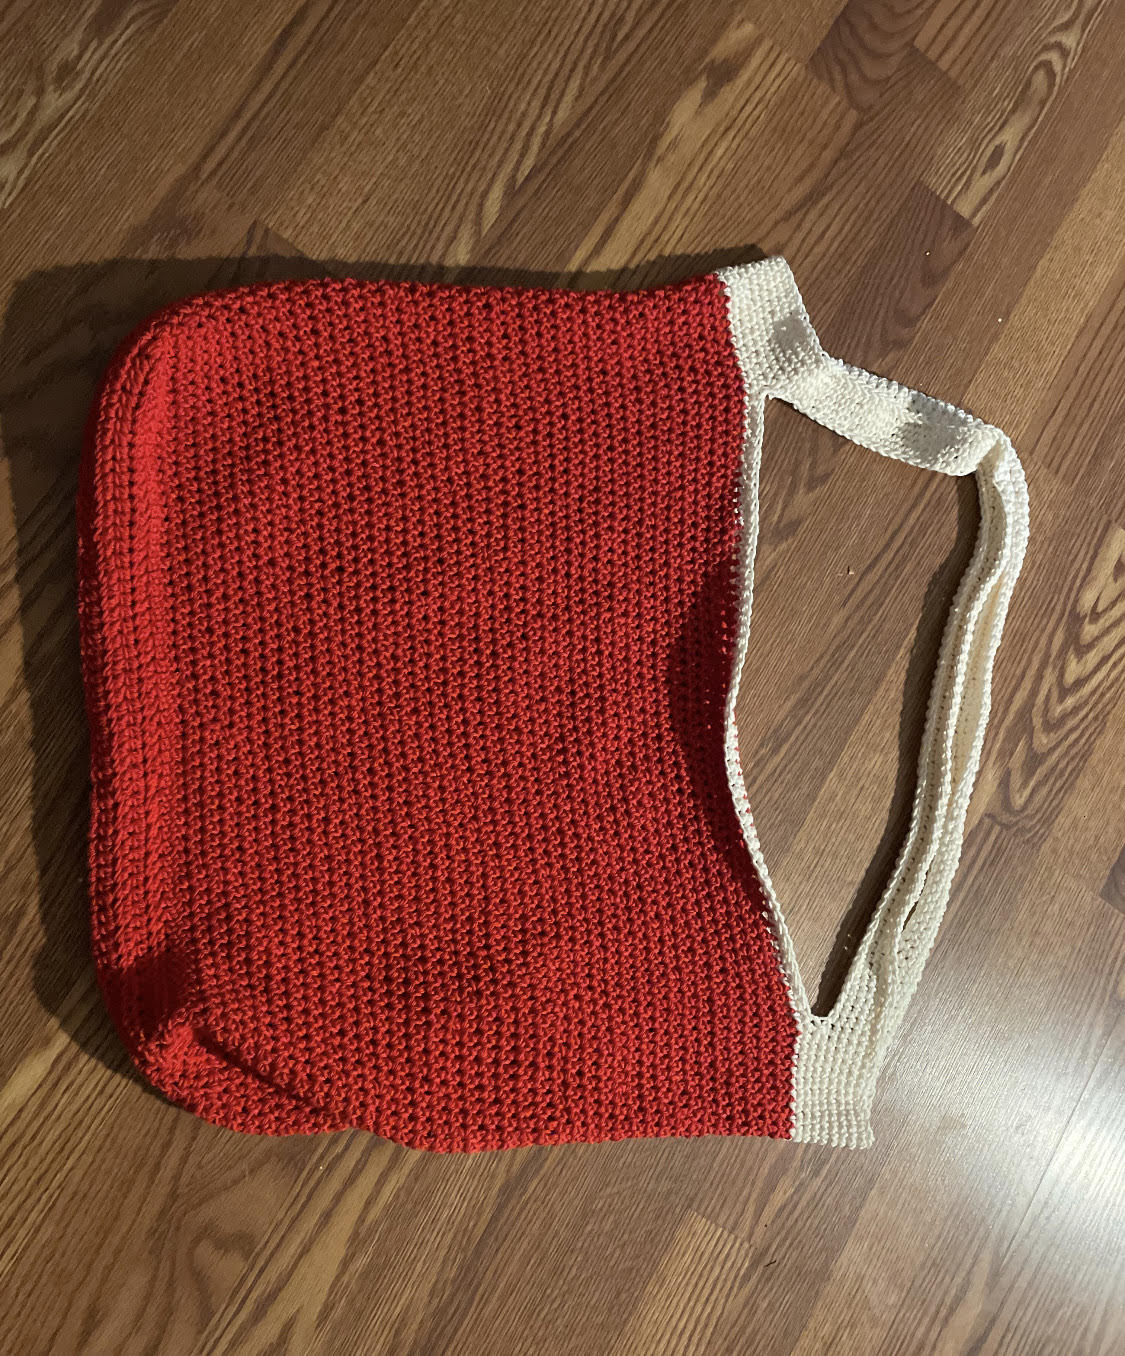 picture of a red bag